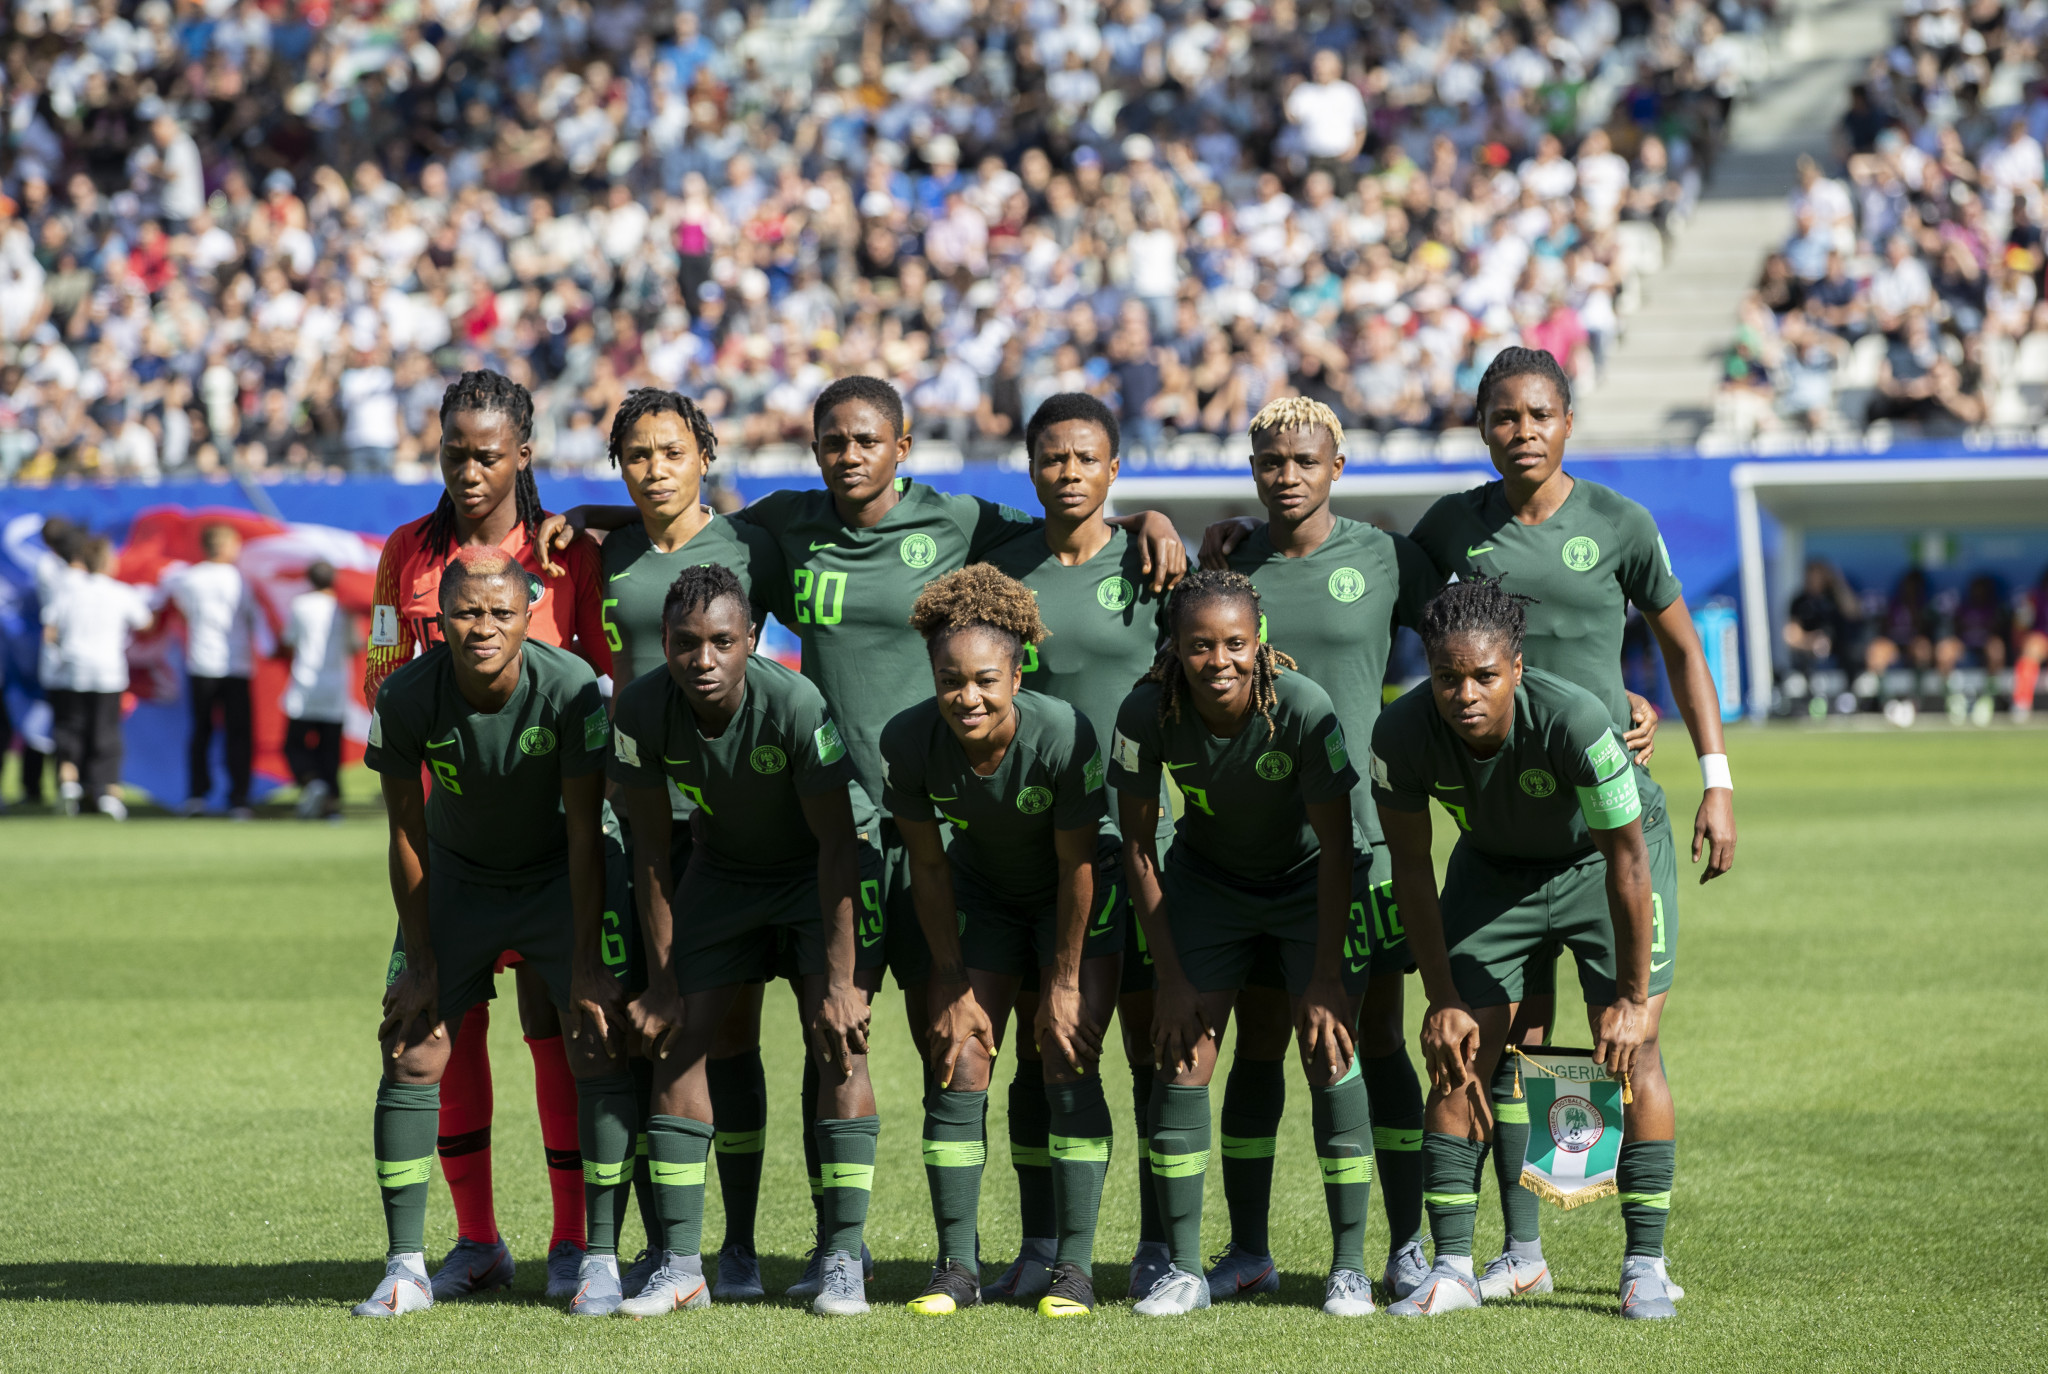 Nigeria have ended their sit-in protest over unpaid bonuses and allowances and left their hotel in France following elimination from the FIFA Women’s World Cup ©Getty Images